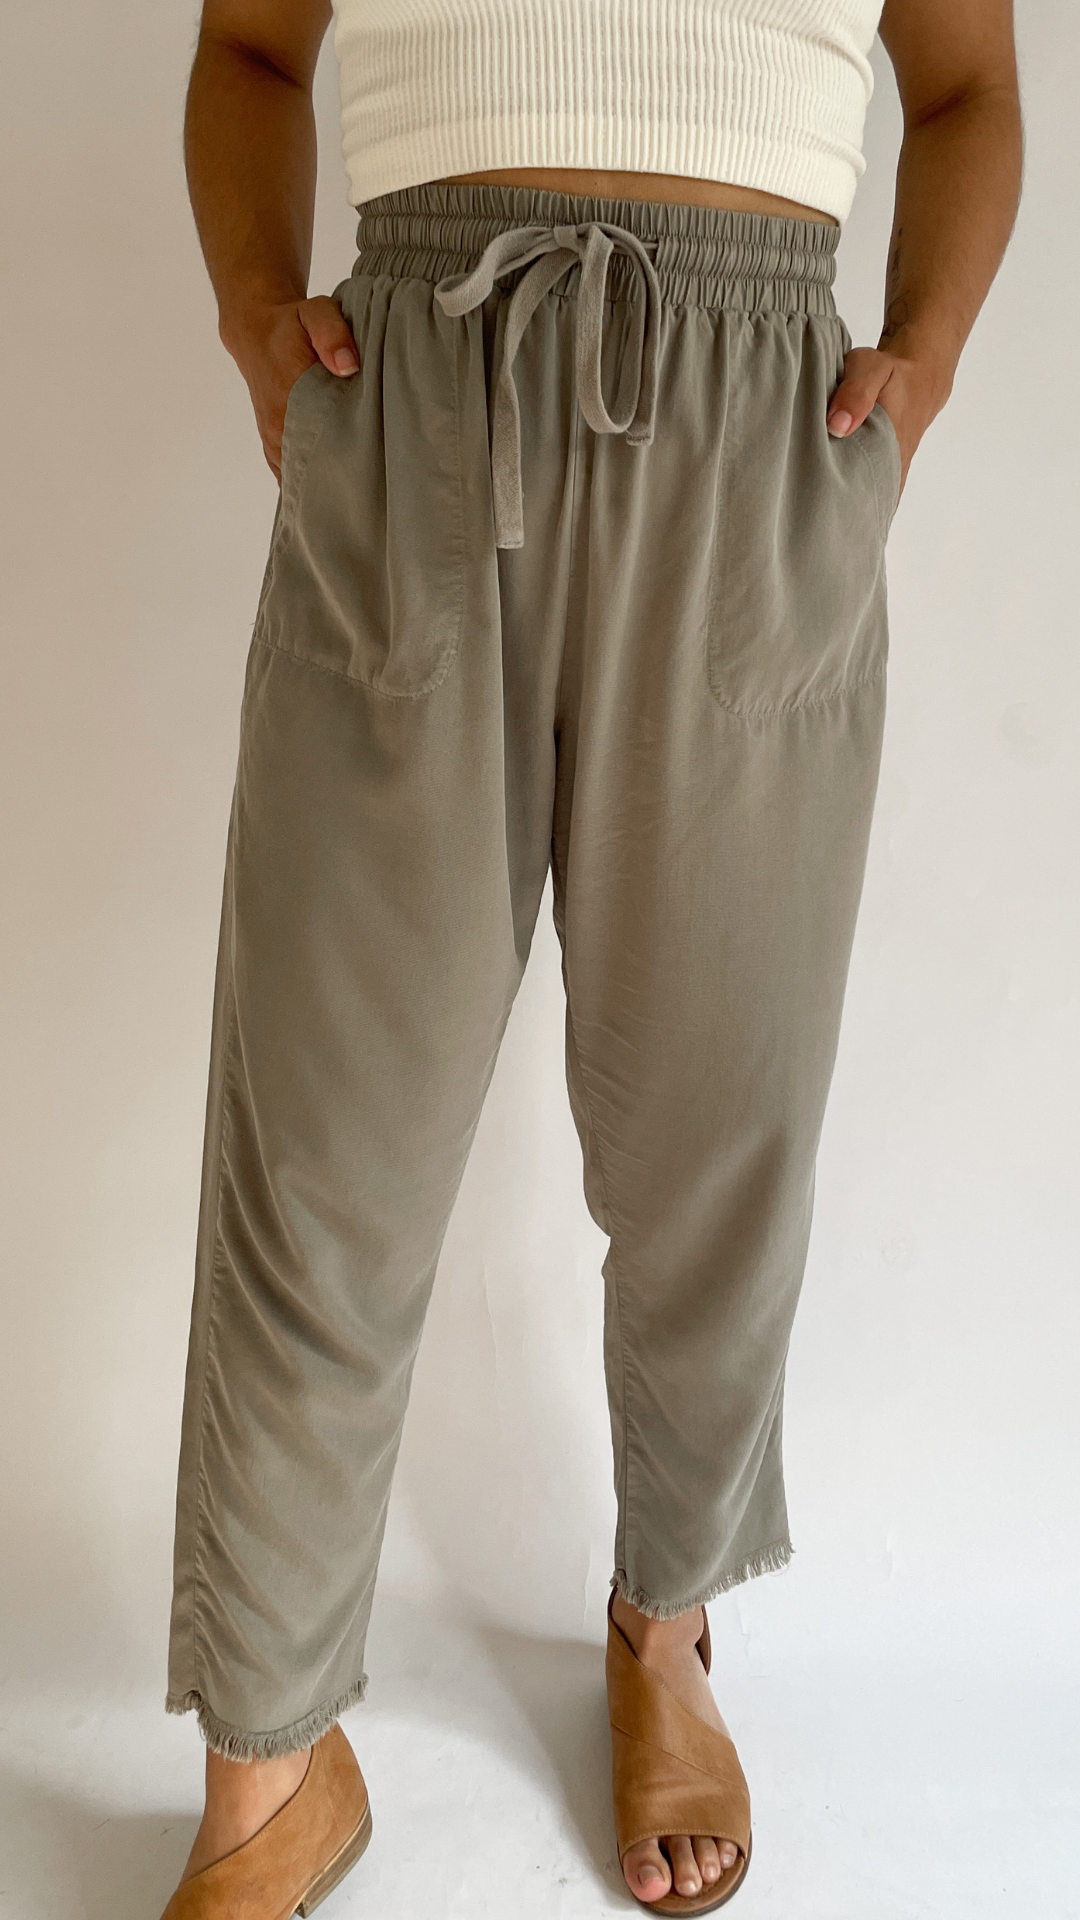 Kaya Relaxed Fit Pant Wholesale Only Pants 